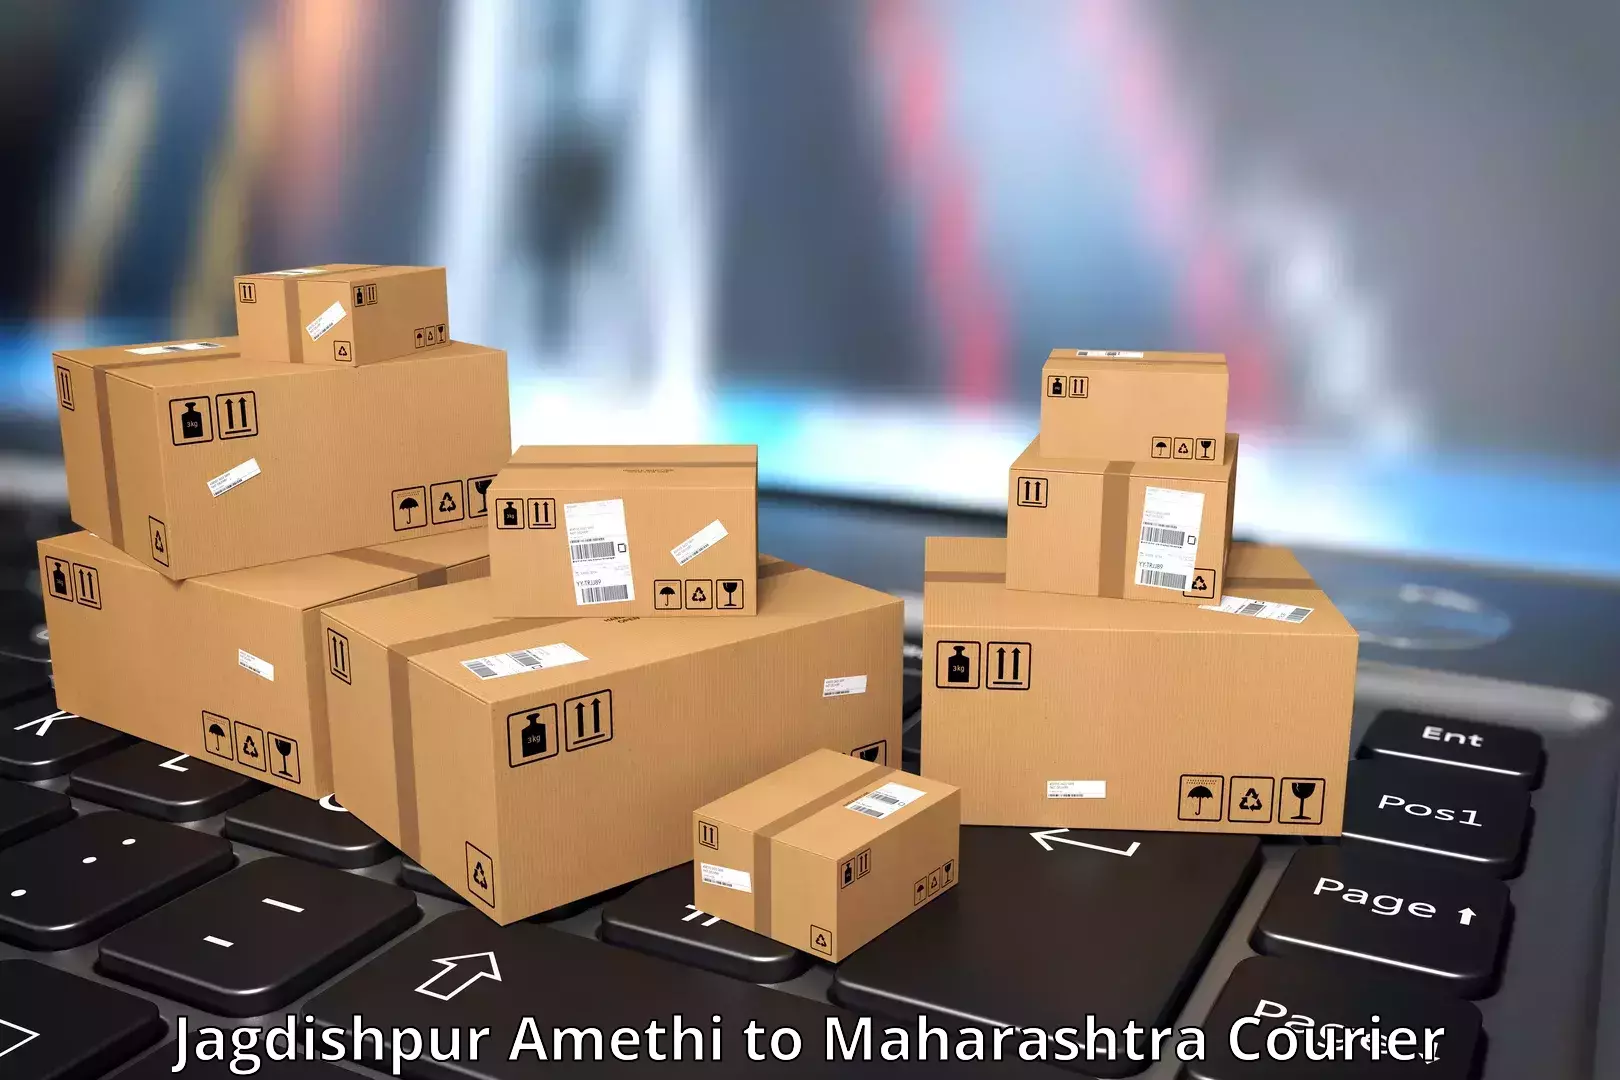 Courier service booking Jagdishpur Amethi to Bhoom